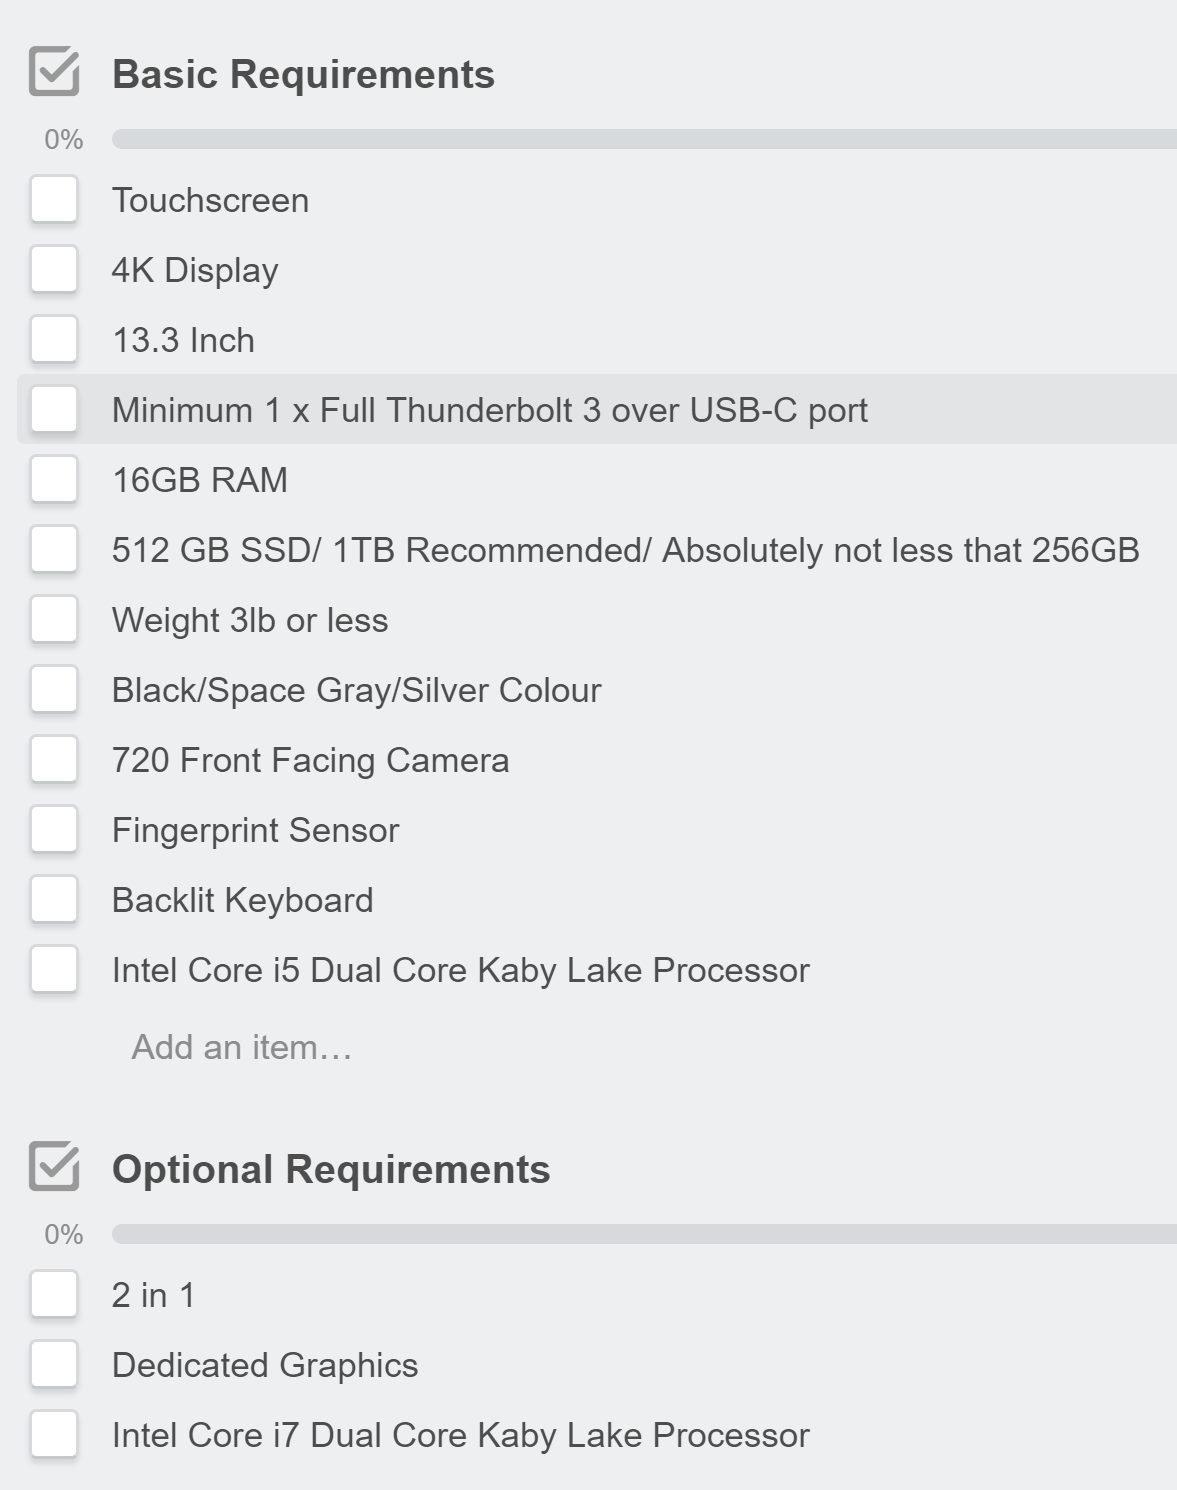 Basic Laptop Requirements for 2017